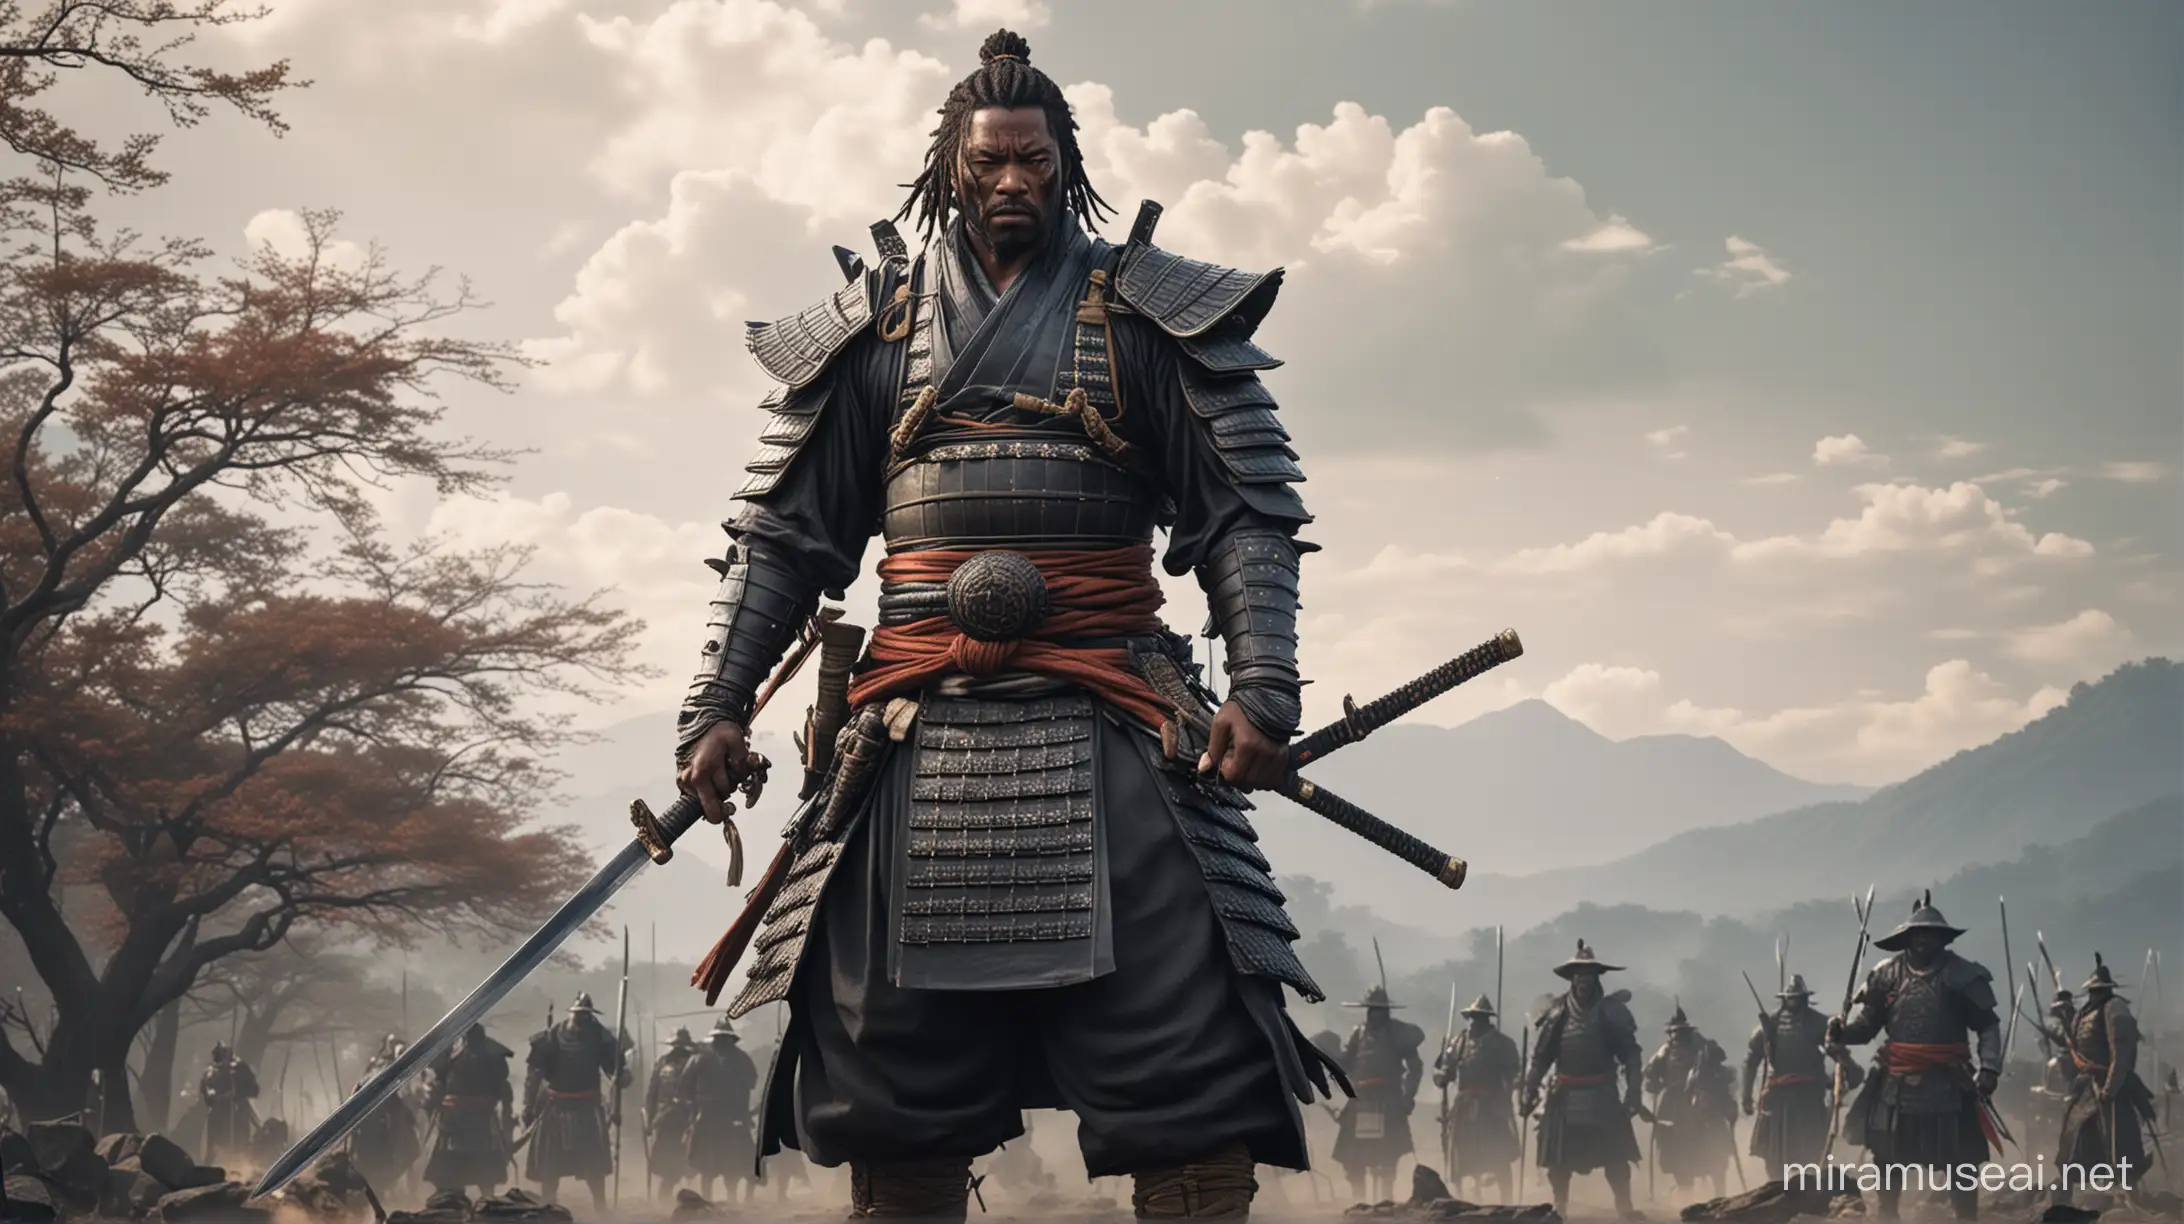 Yasuke, a towering figure with dark skin, clad in samurai armor, standing amidst a battlefield, his sword drawn